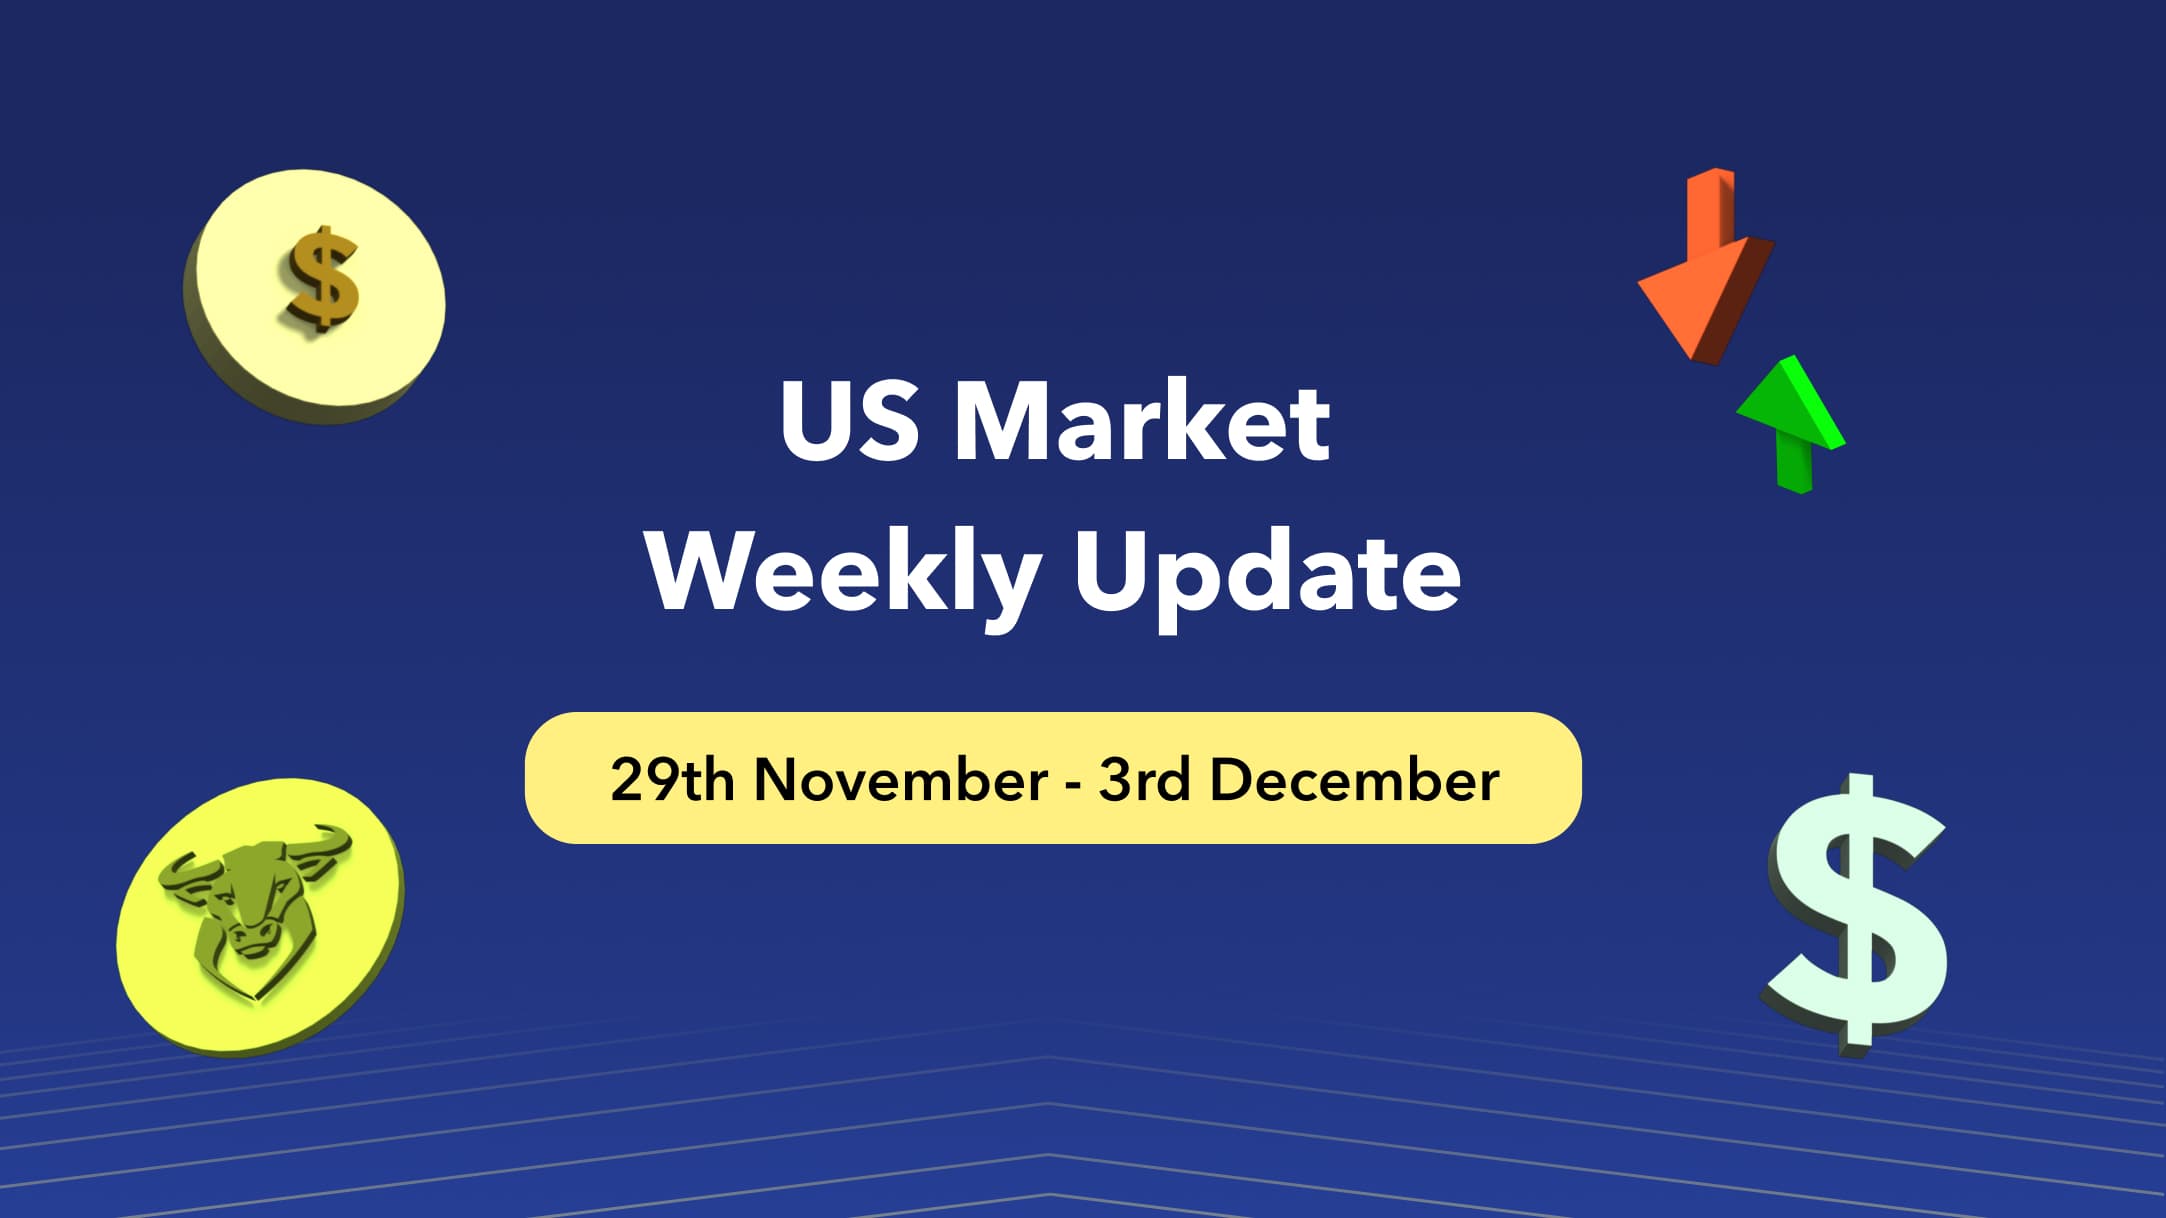 US market weekly: S&P 500 ends lower amid new covid variant and mixed macroeconomic signals.